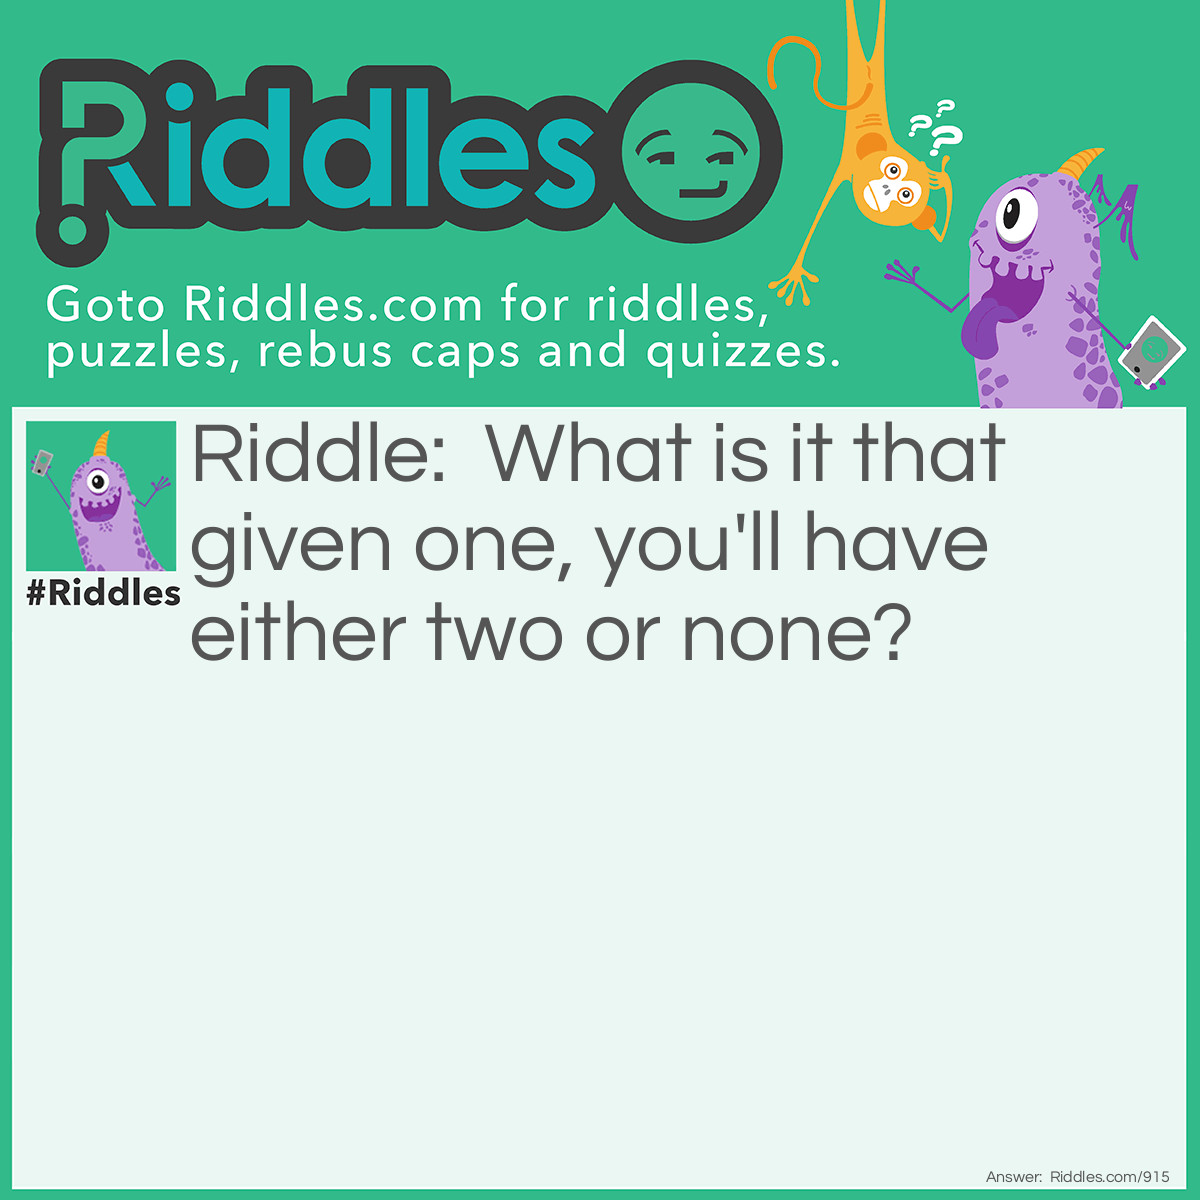 Riddle: What is it that given one, you'll have either two or none? Answer: A choice.